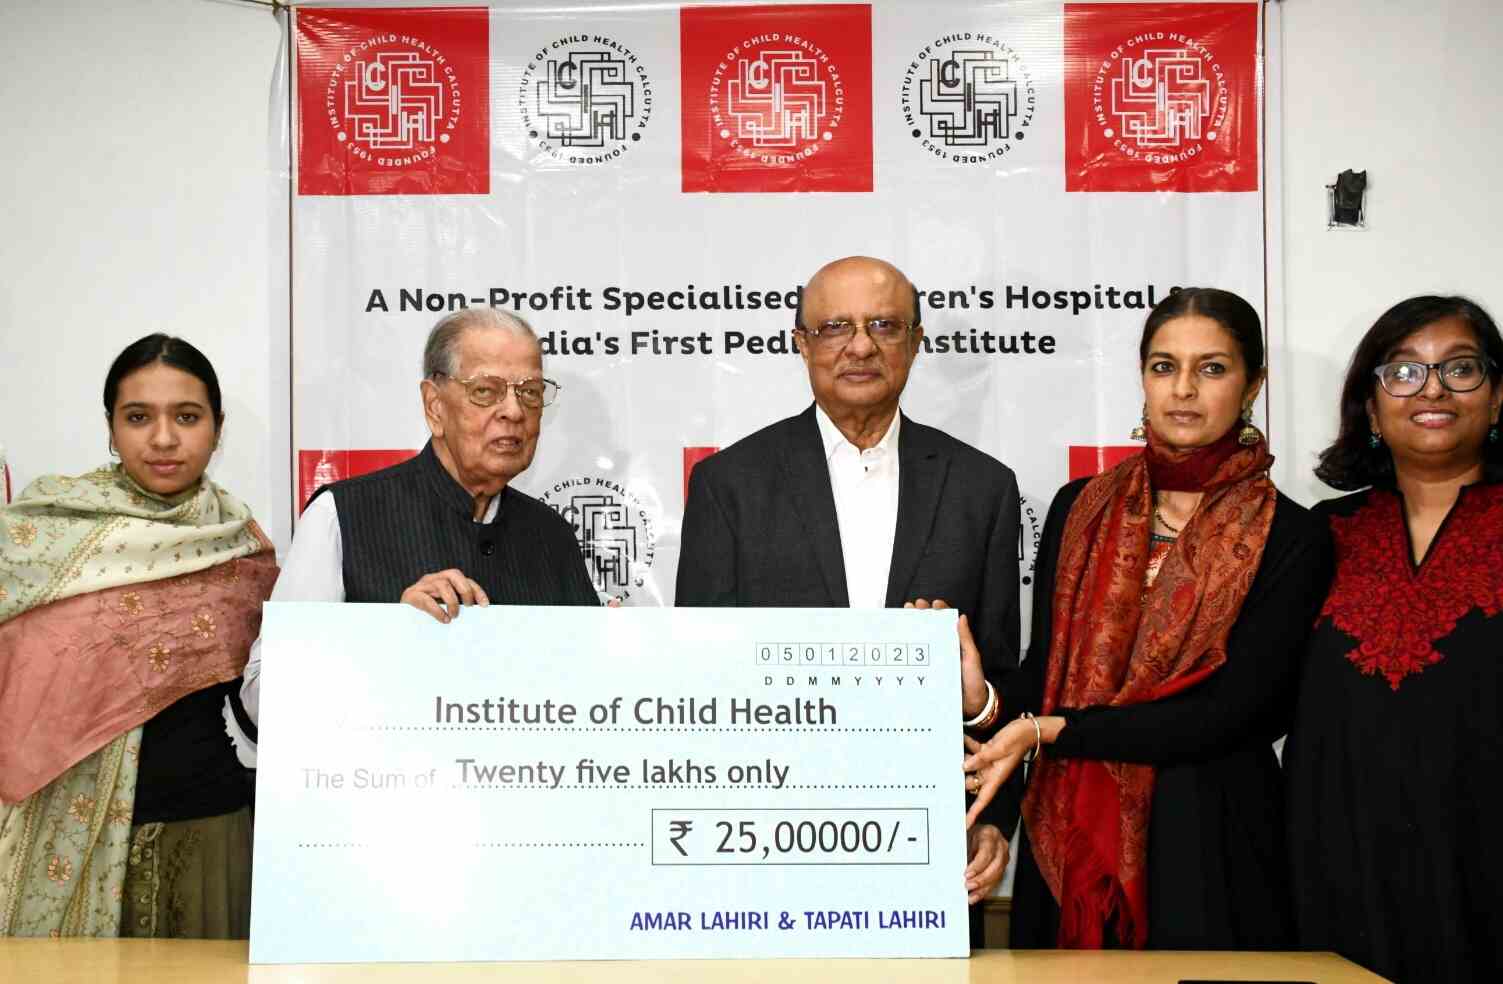 Author Jhumpa Lahiri (second from right) and father Amar Lahiri (second from left) hand over a cheque to the Institute of Child Health, Kolkata, on Thursday